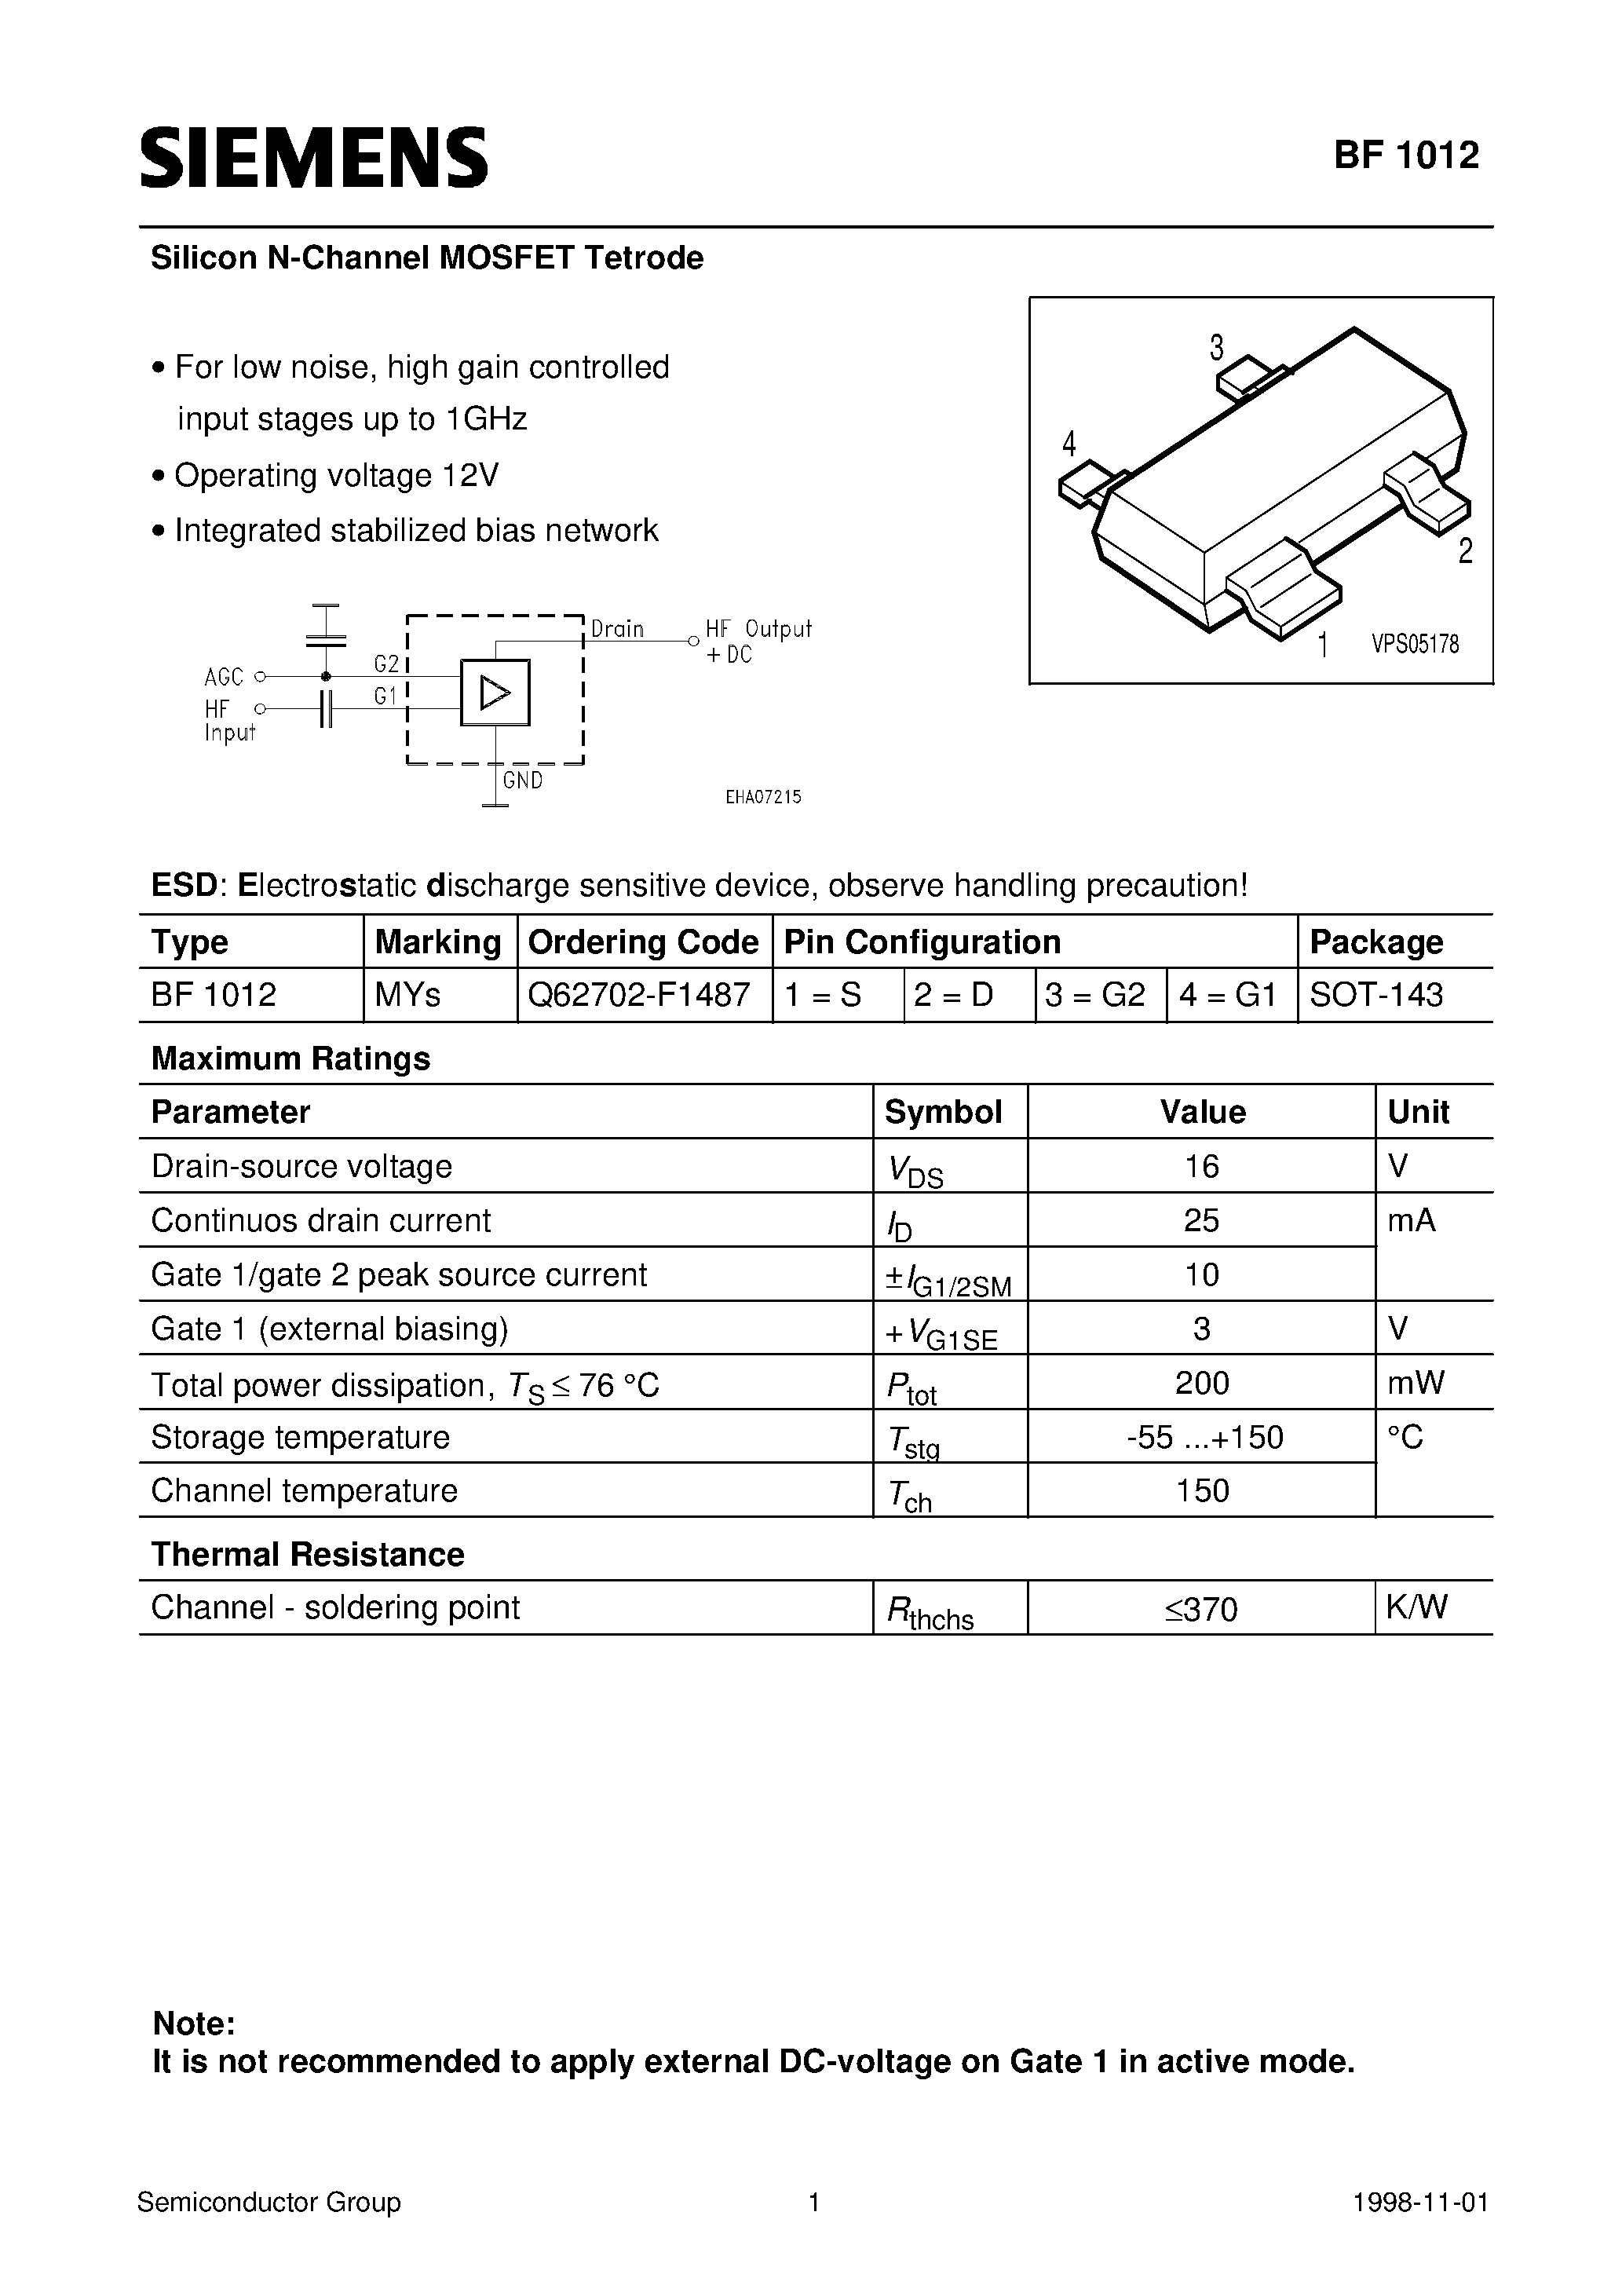 Даташит BF1012 - Silicon N-Channel MOSFET Tetrode (For low noise/ high gain controlled input stages up to 1GHz Operating voltage 12V Integrated stabilized bias network страница 1